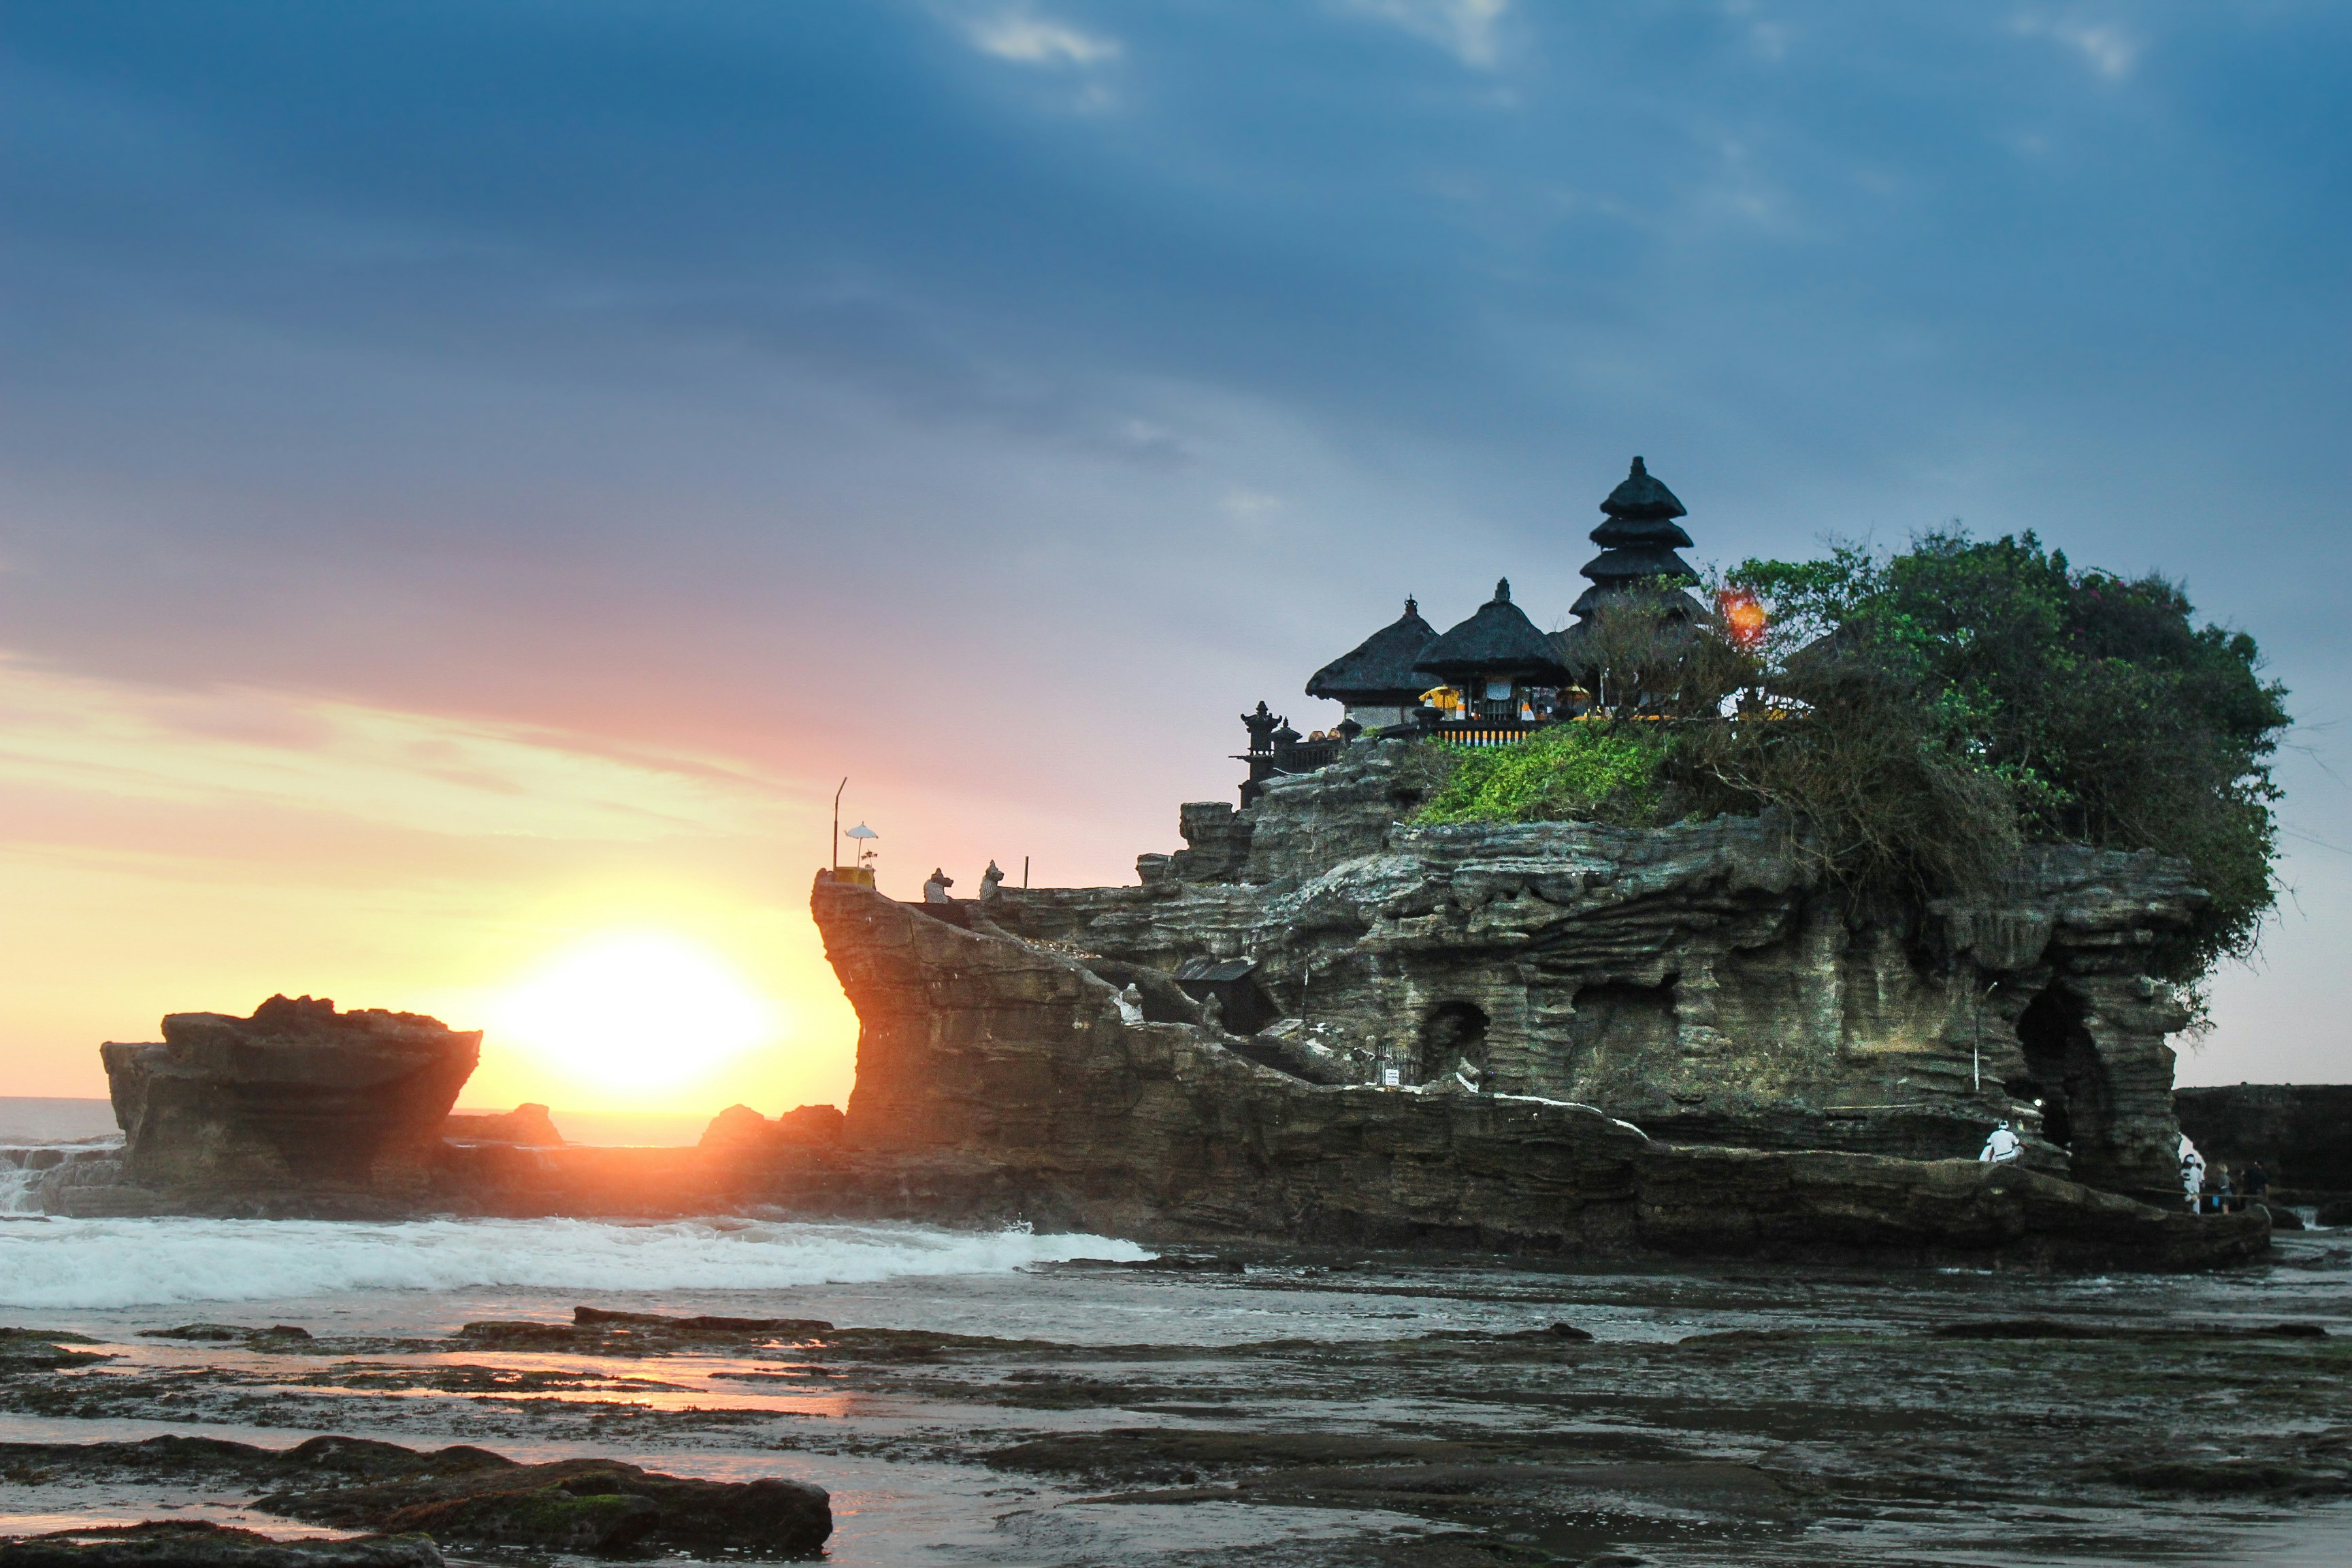 This was a temple in Bali well known for the sunset’s it can produce and trust me I was not the only person snapping this moment on their camera, If anything I wish I could go back to the location and try again but I tried multiple angle’s before getting this shot which I believe to be the best of my capabilities.